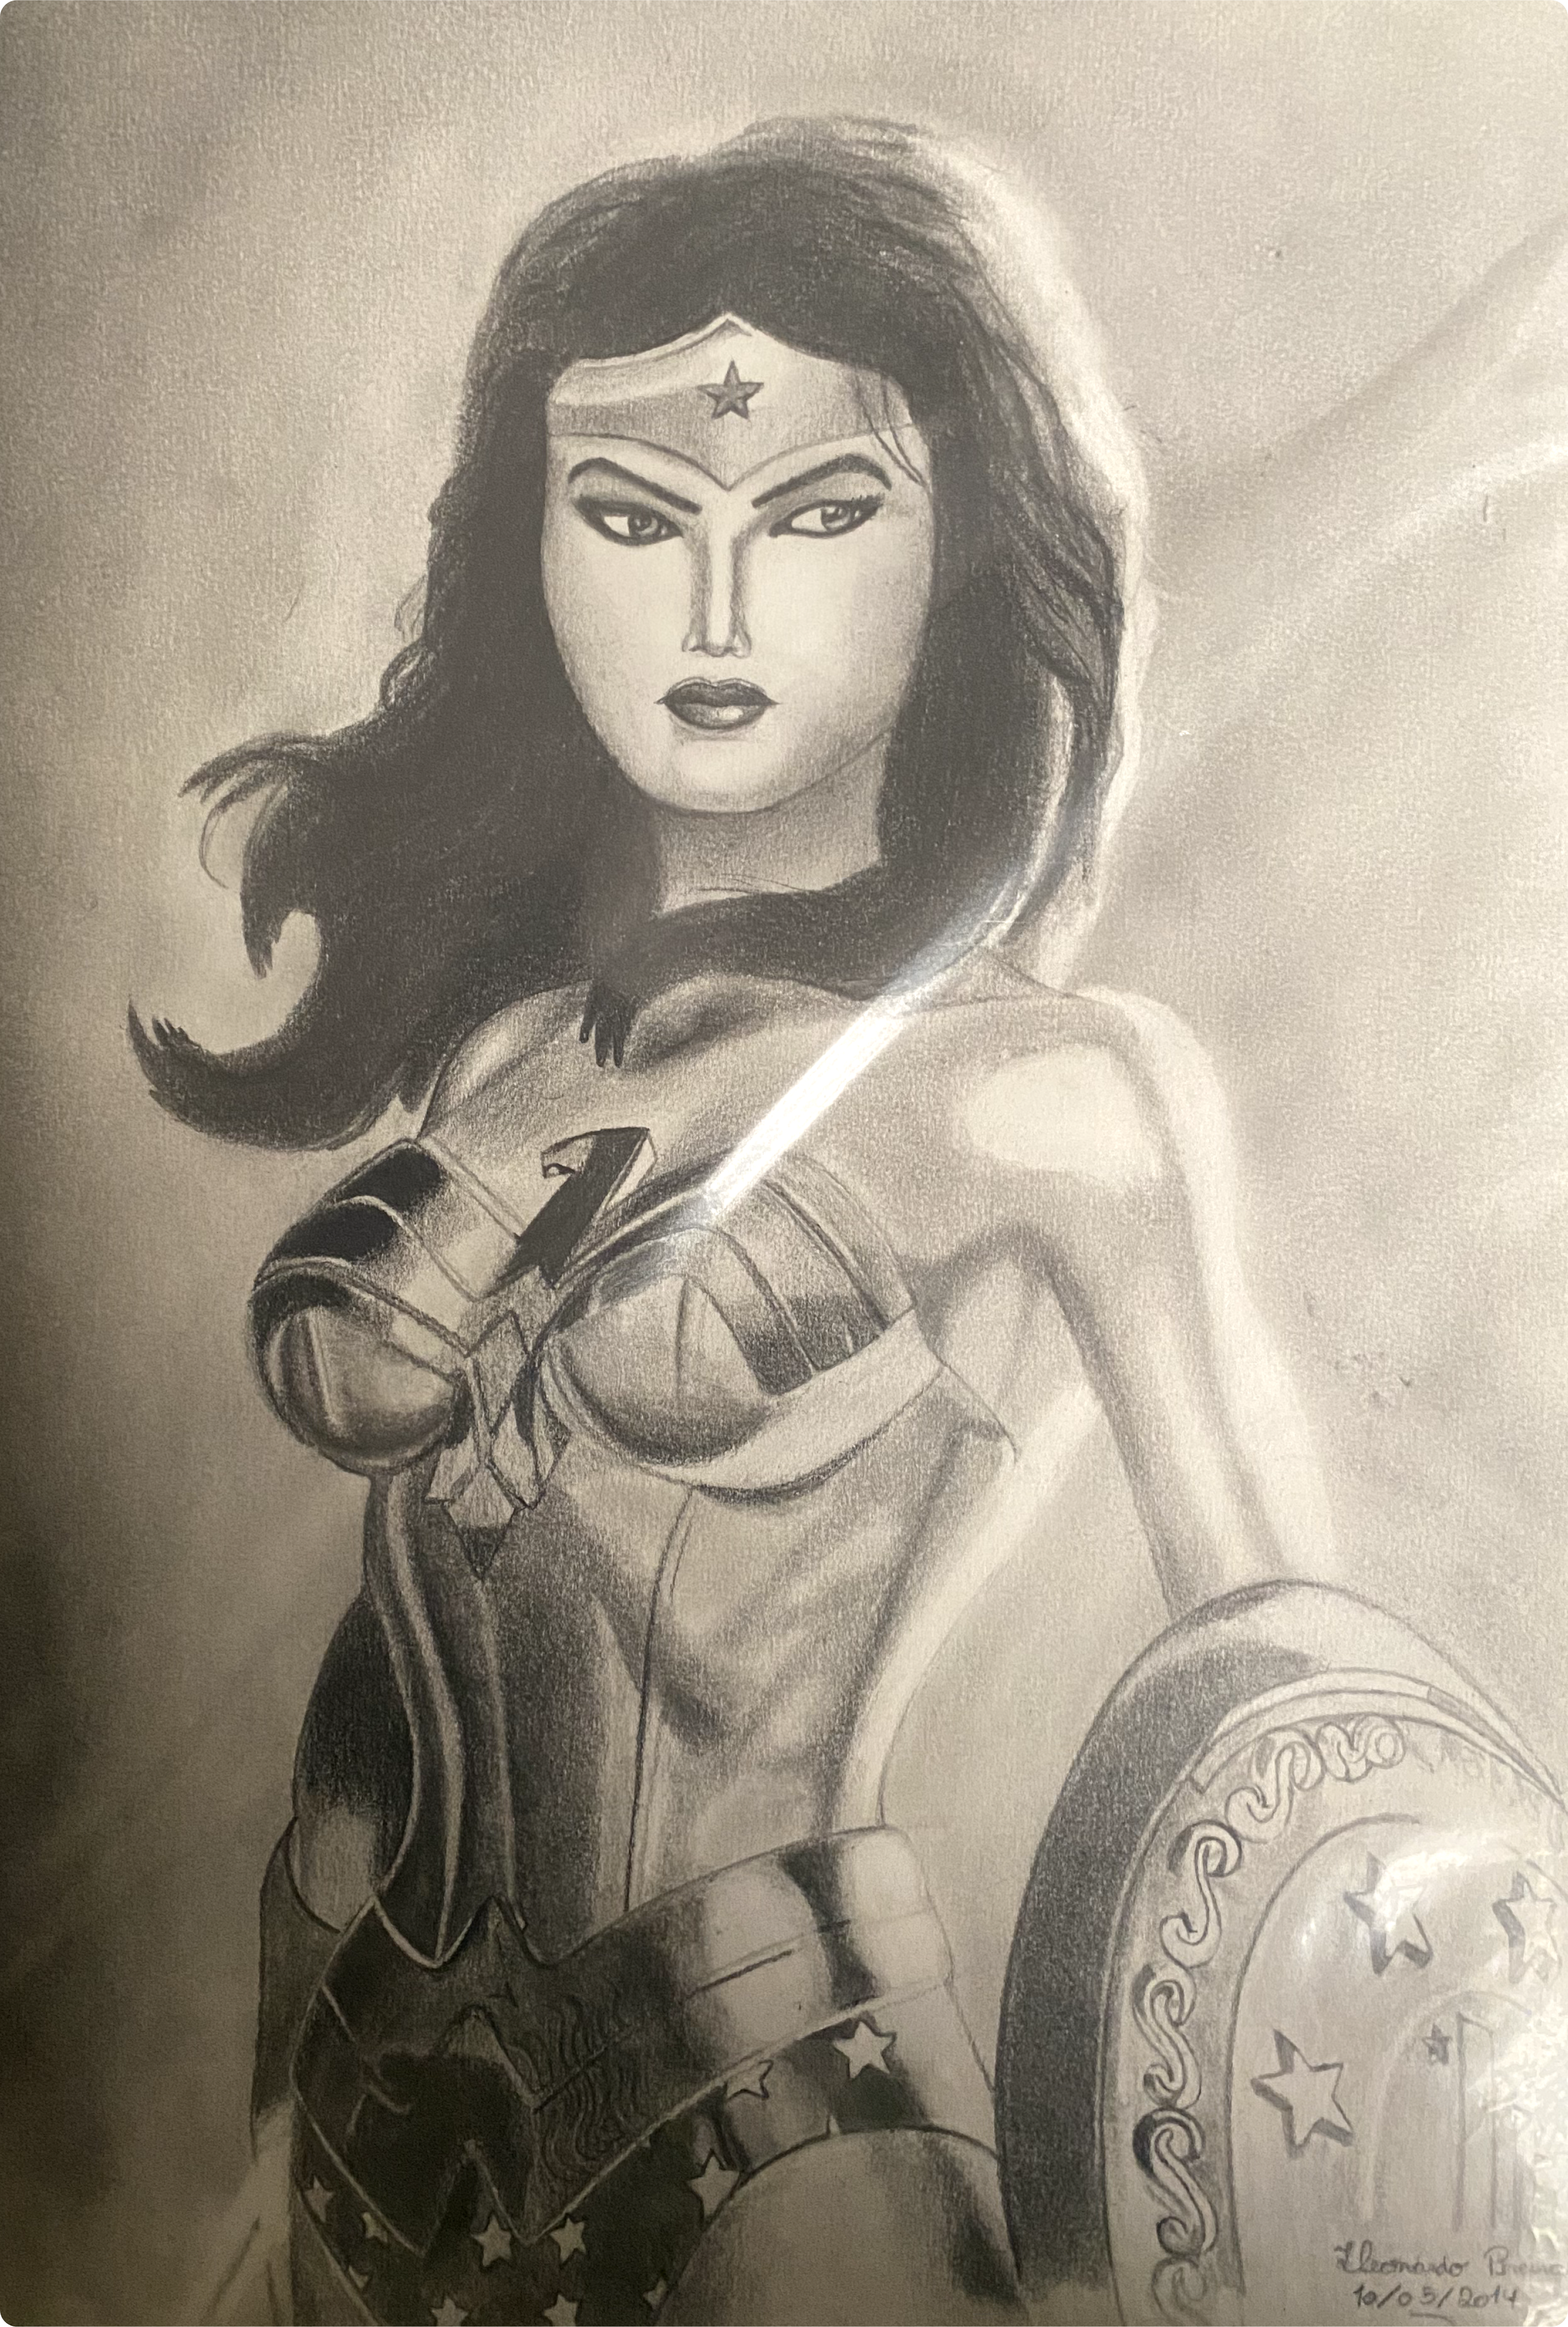 Wonder Woman's picture